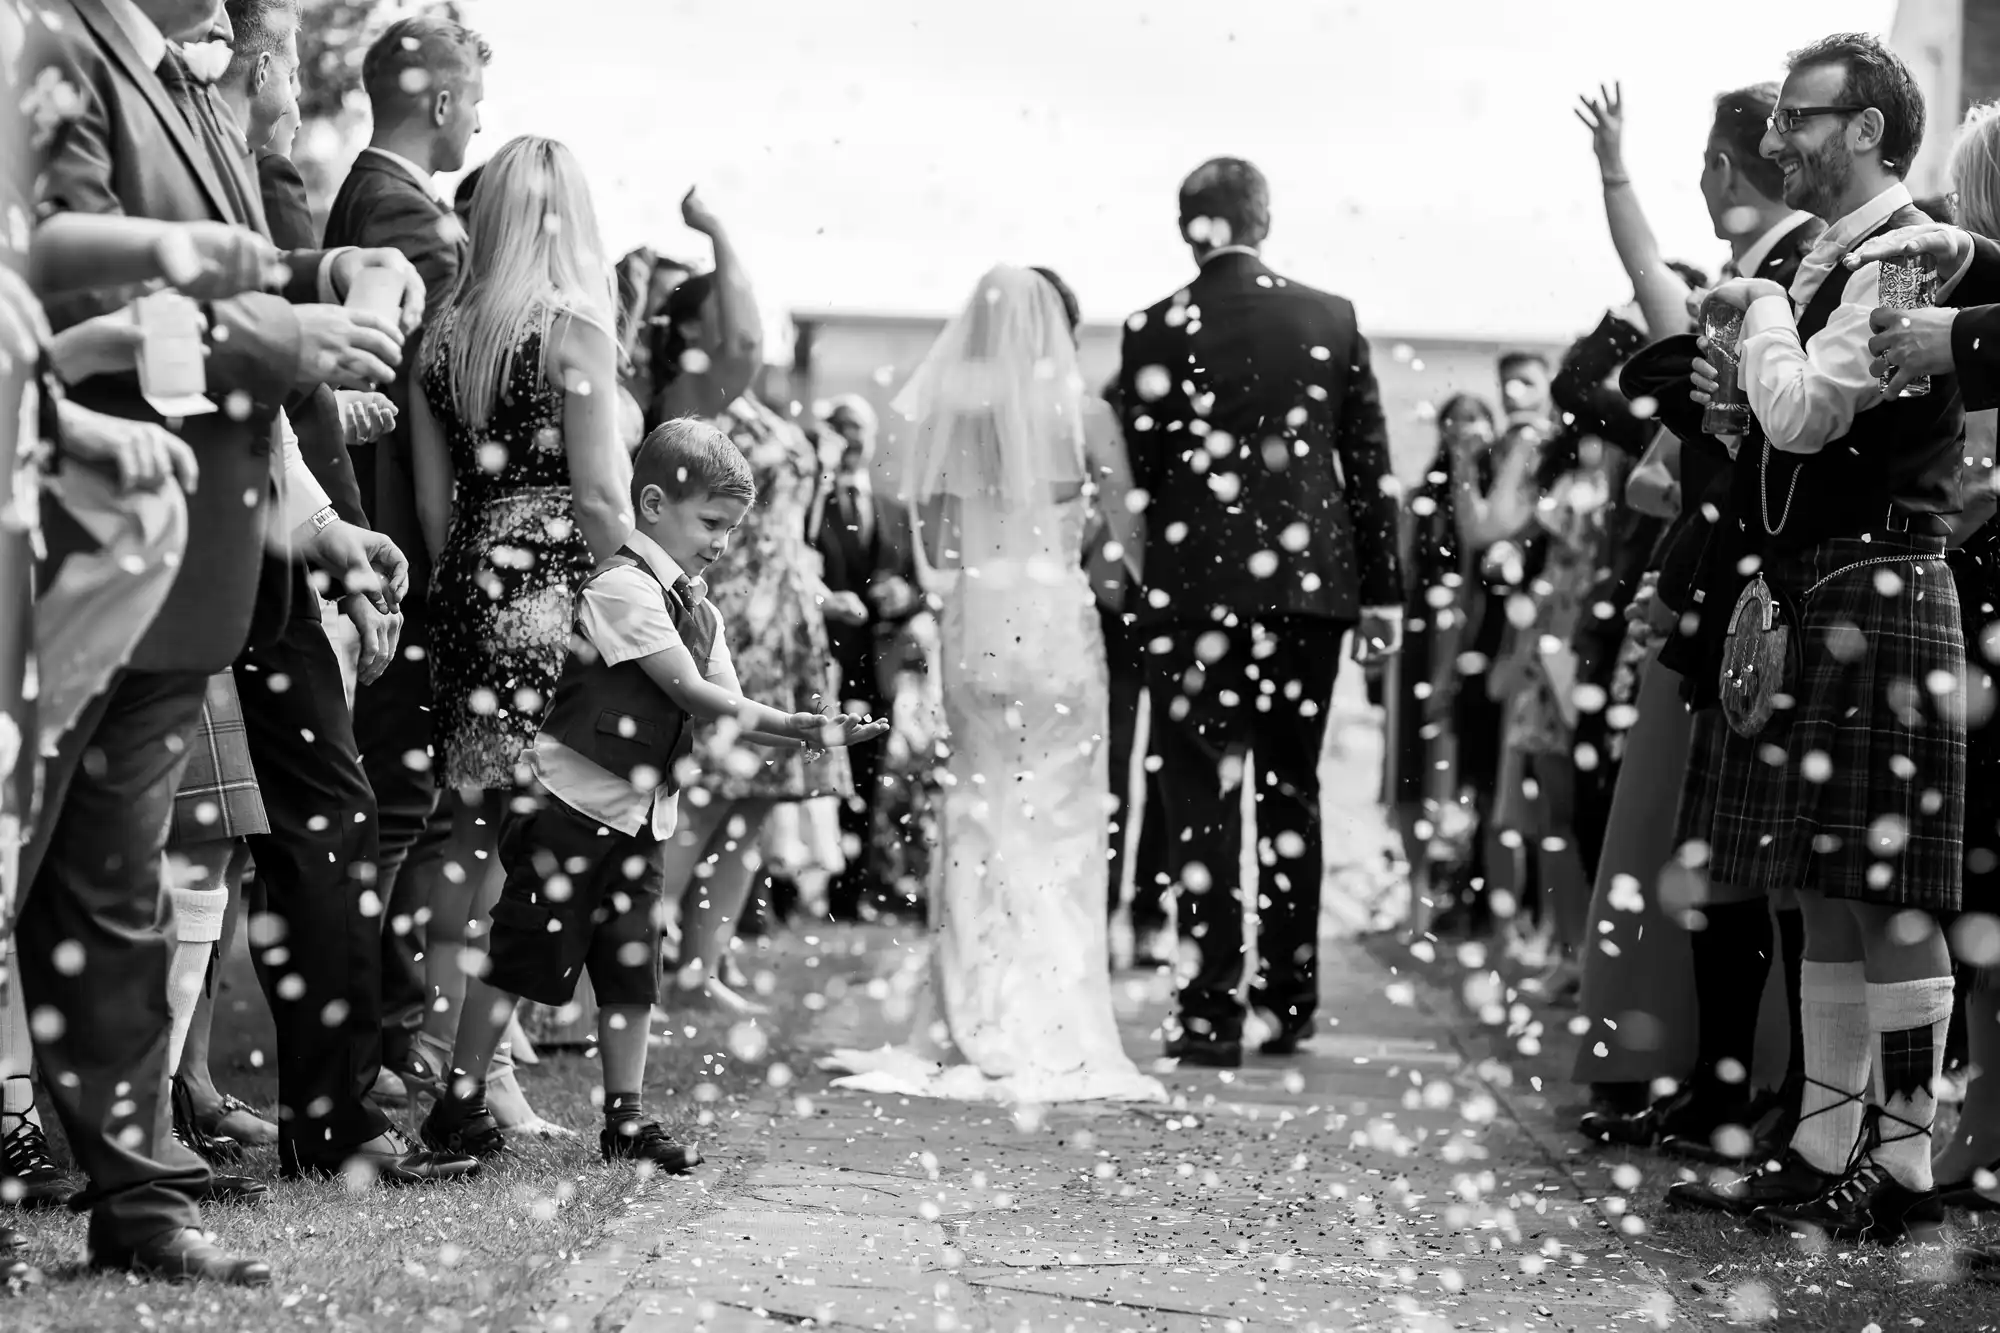 Black and white image of a wedding celebration with guests throwing confetti as a bride and groom walk down an outdoor aisle.